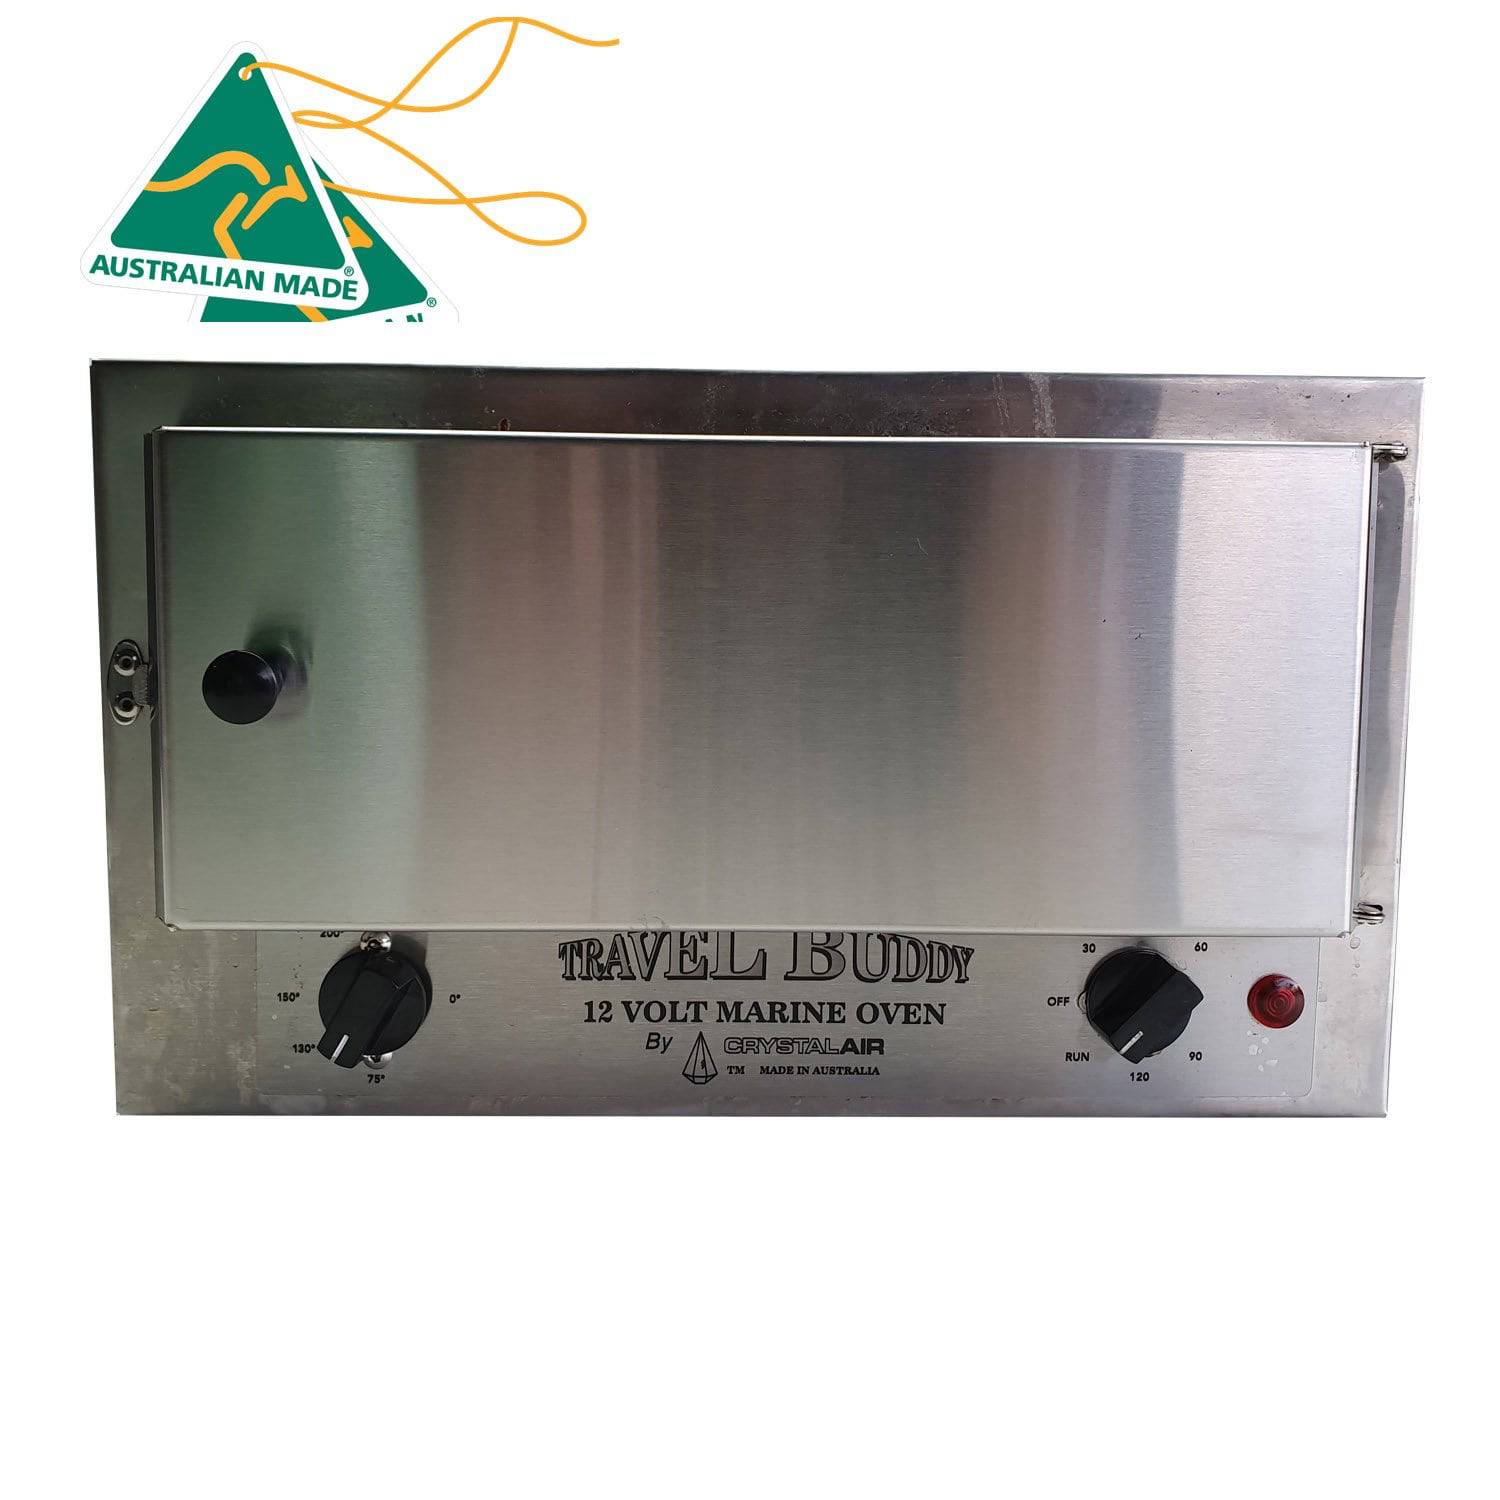 SMW Insulated Door for Travel Buddy Marine - No Latch (Larger Oven) | Somerville Metal Works